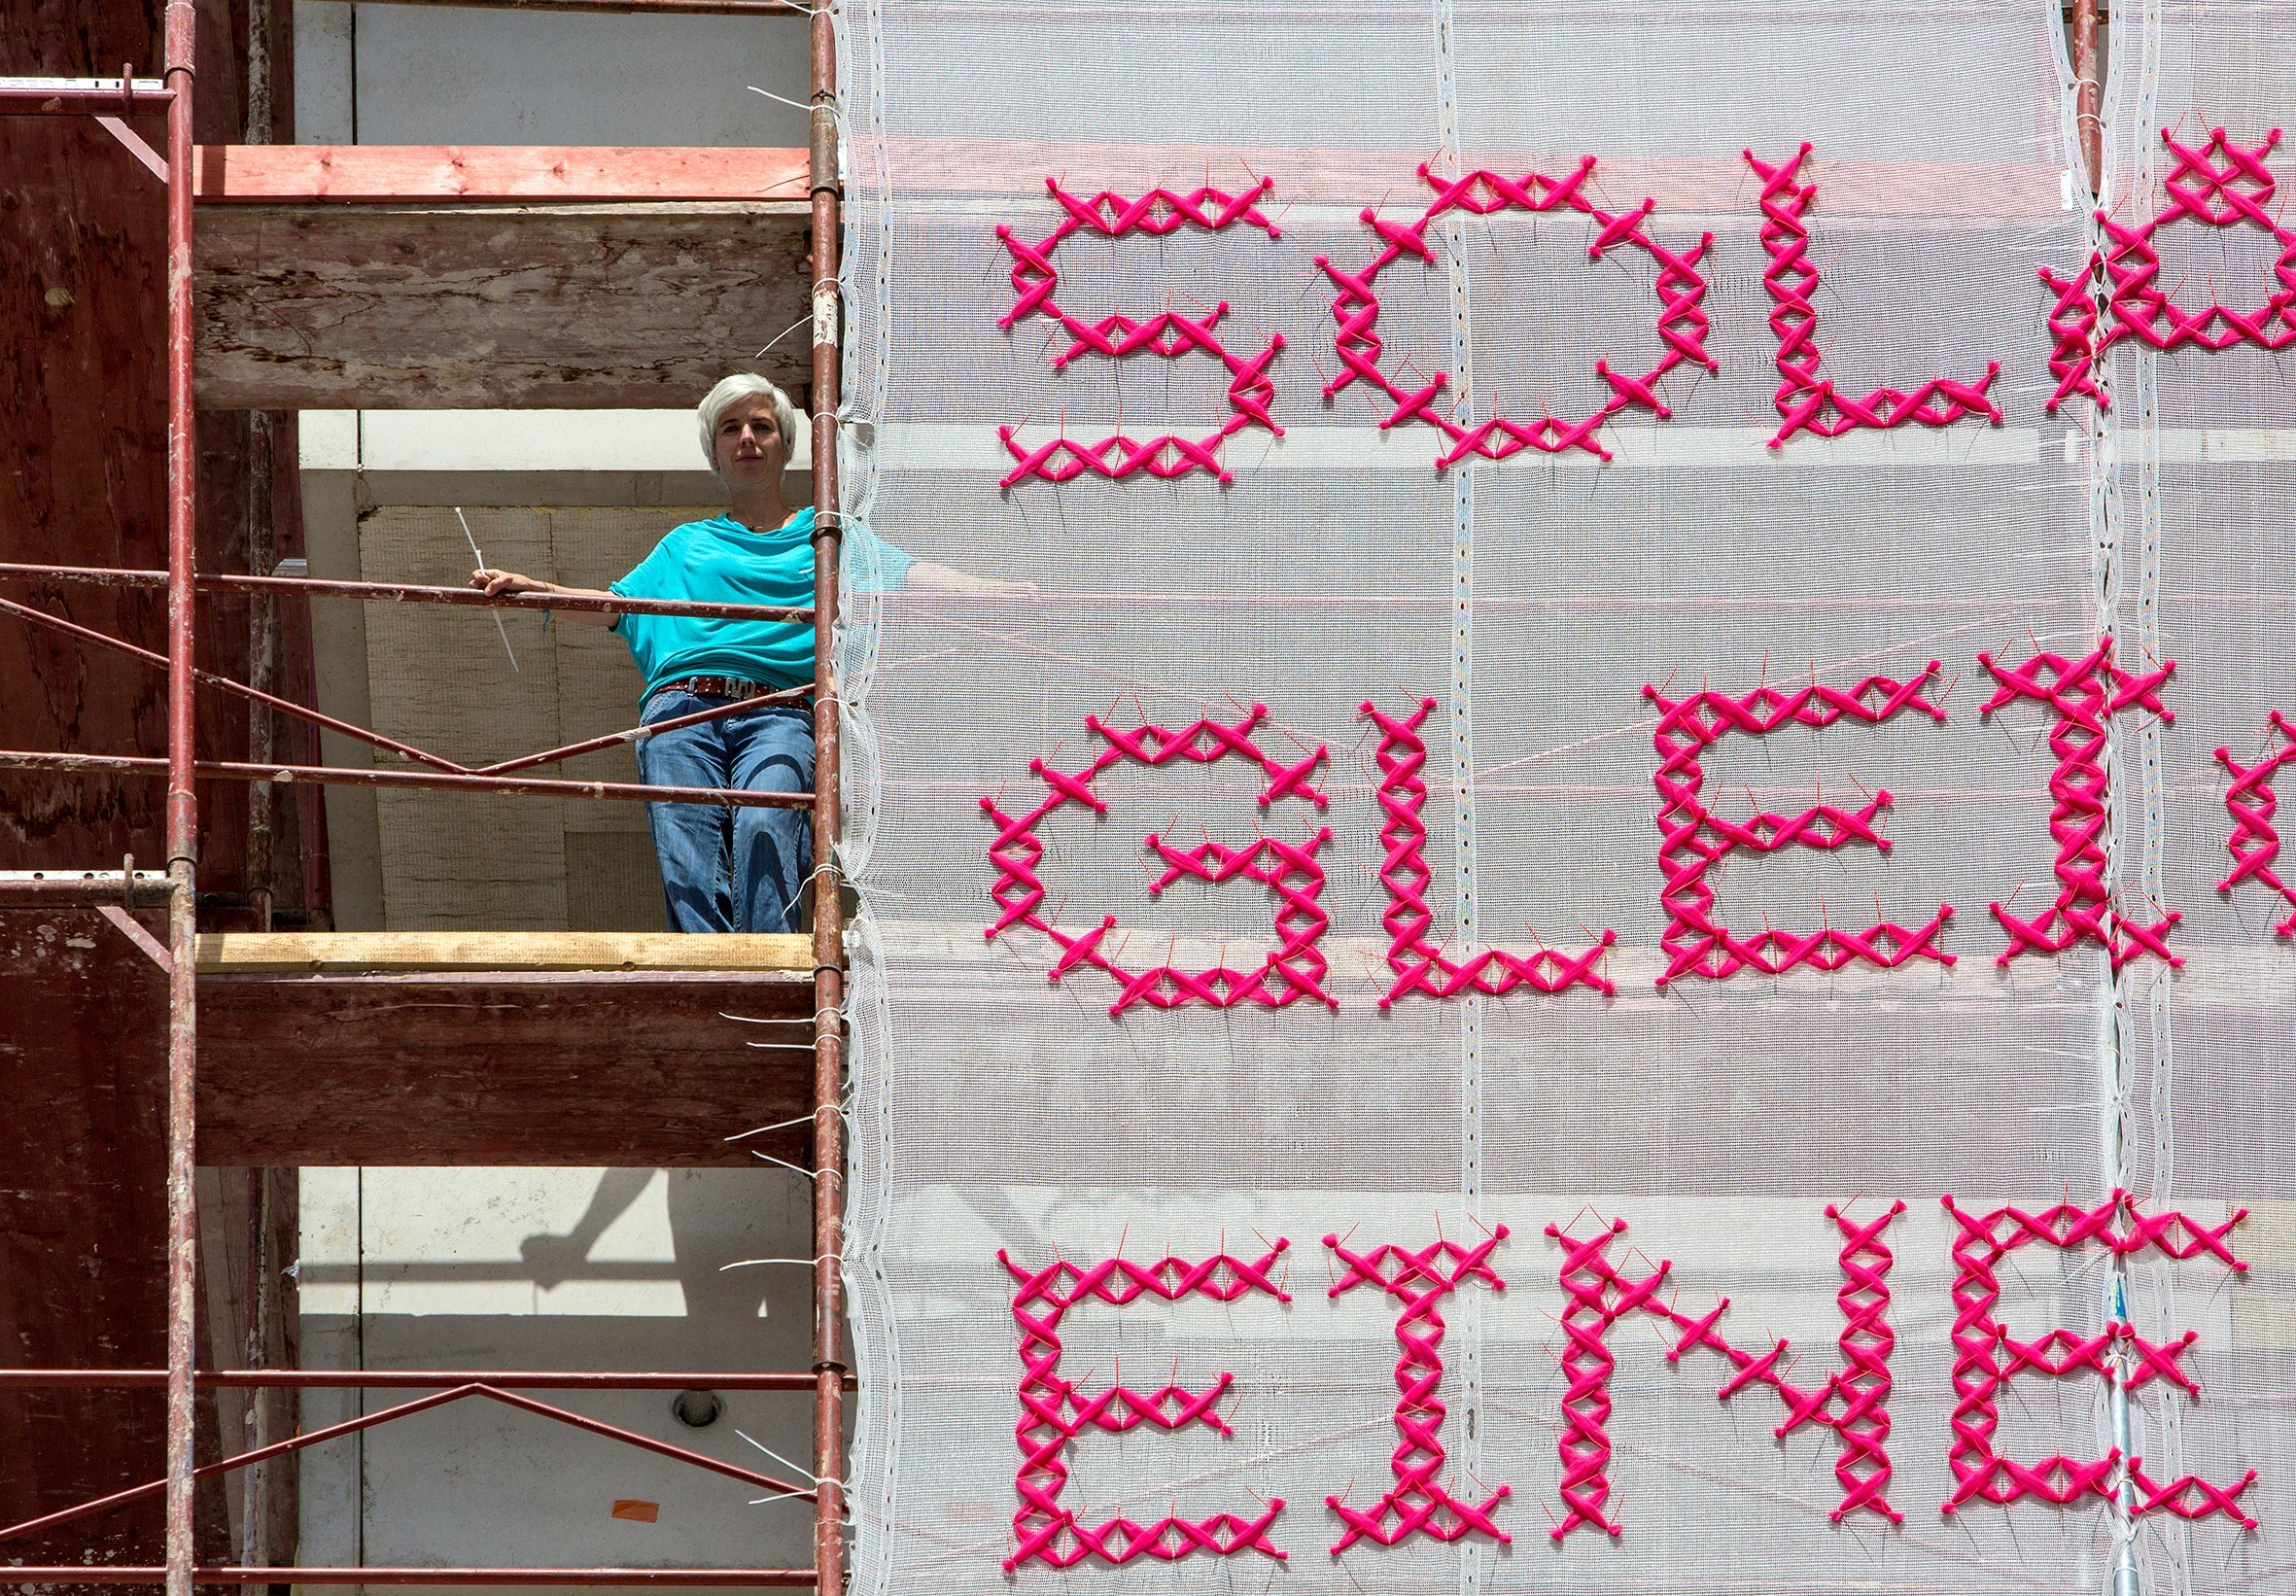 A light-skinned woman with short, platinum blonde hair stands on scaffolding next to a very large panel of white gauzy material with “Solange Gleichberechtigung eine ewige Baustelle ist, bin ich Feministin” stitched in bright pink lettering.